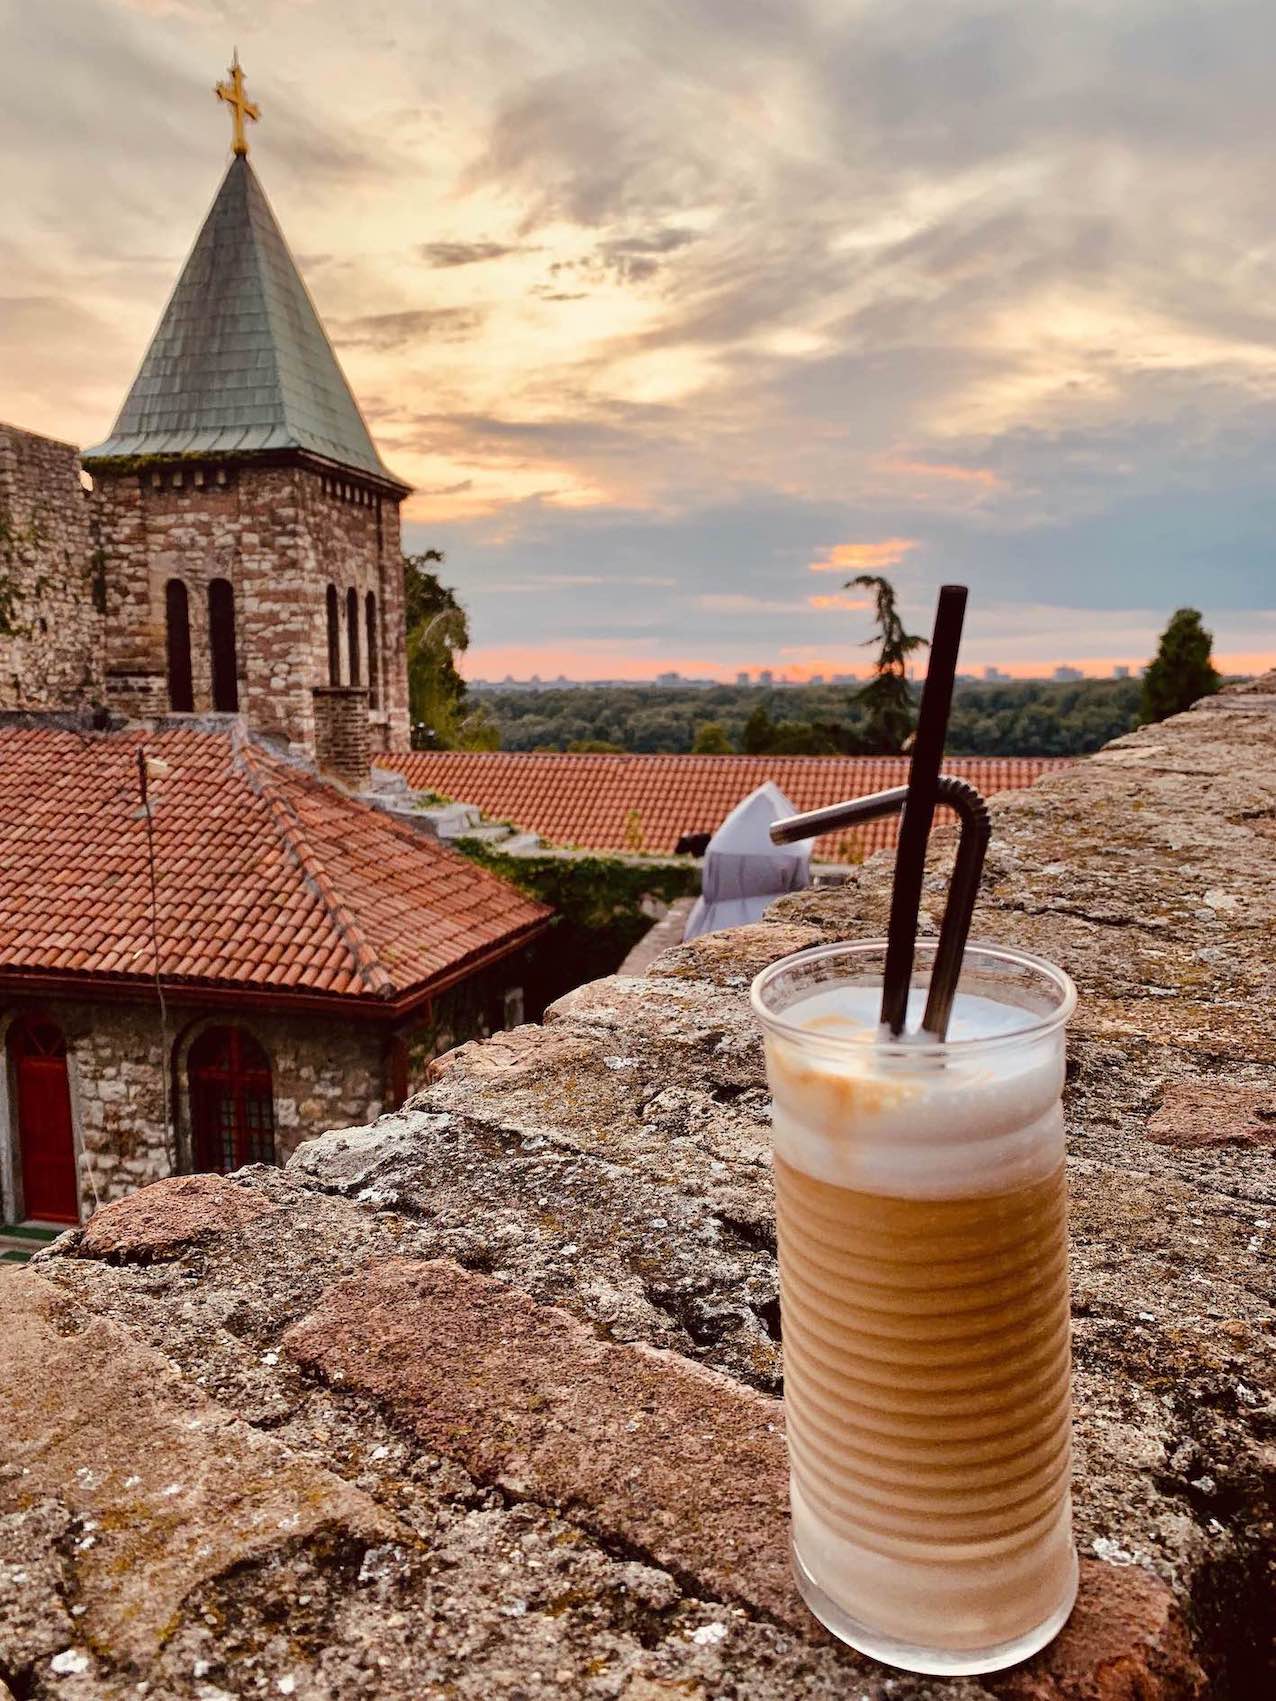 Where to eat and drink in Belgrade Fortress